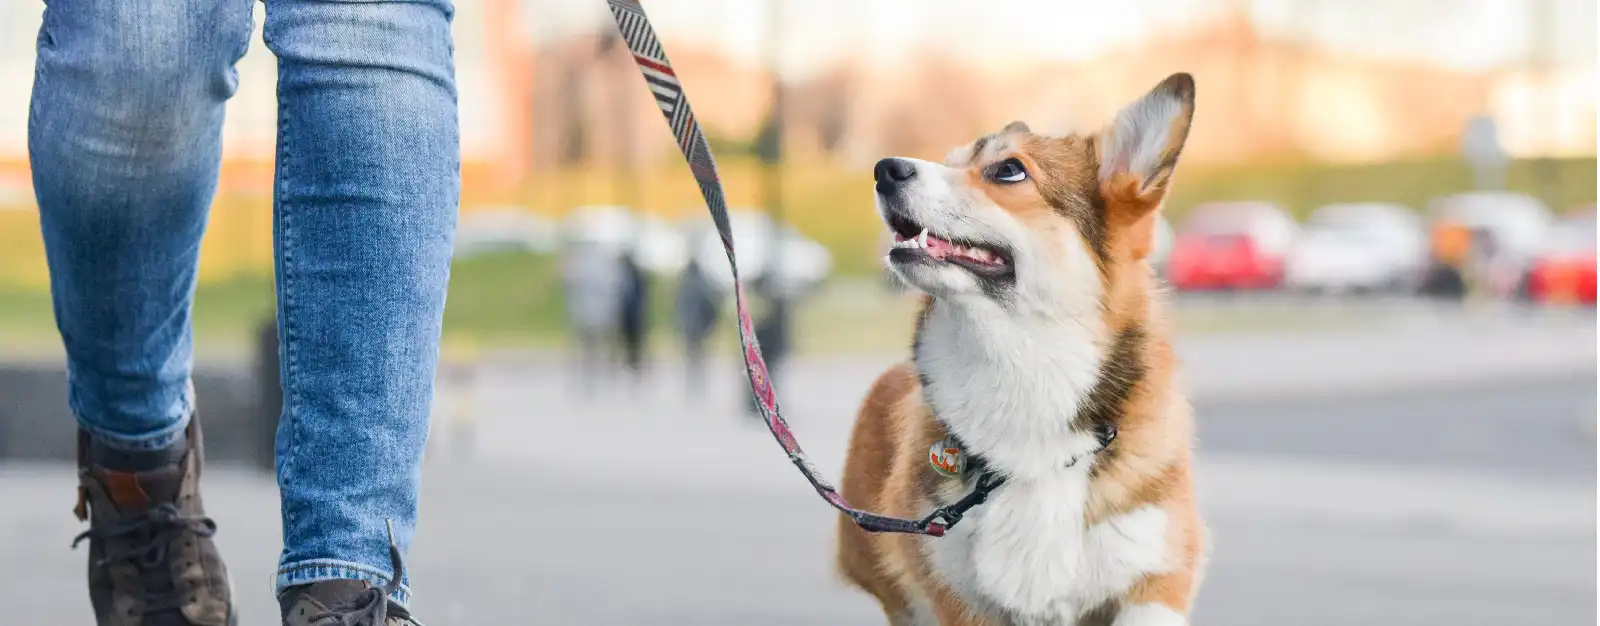 Person walking corgi dog on leash while dog looks at person smiling